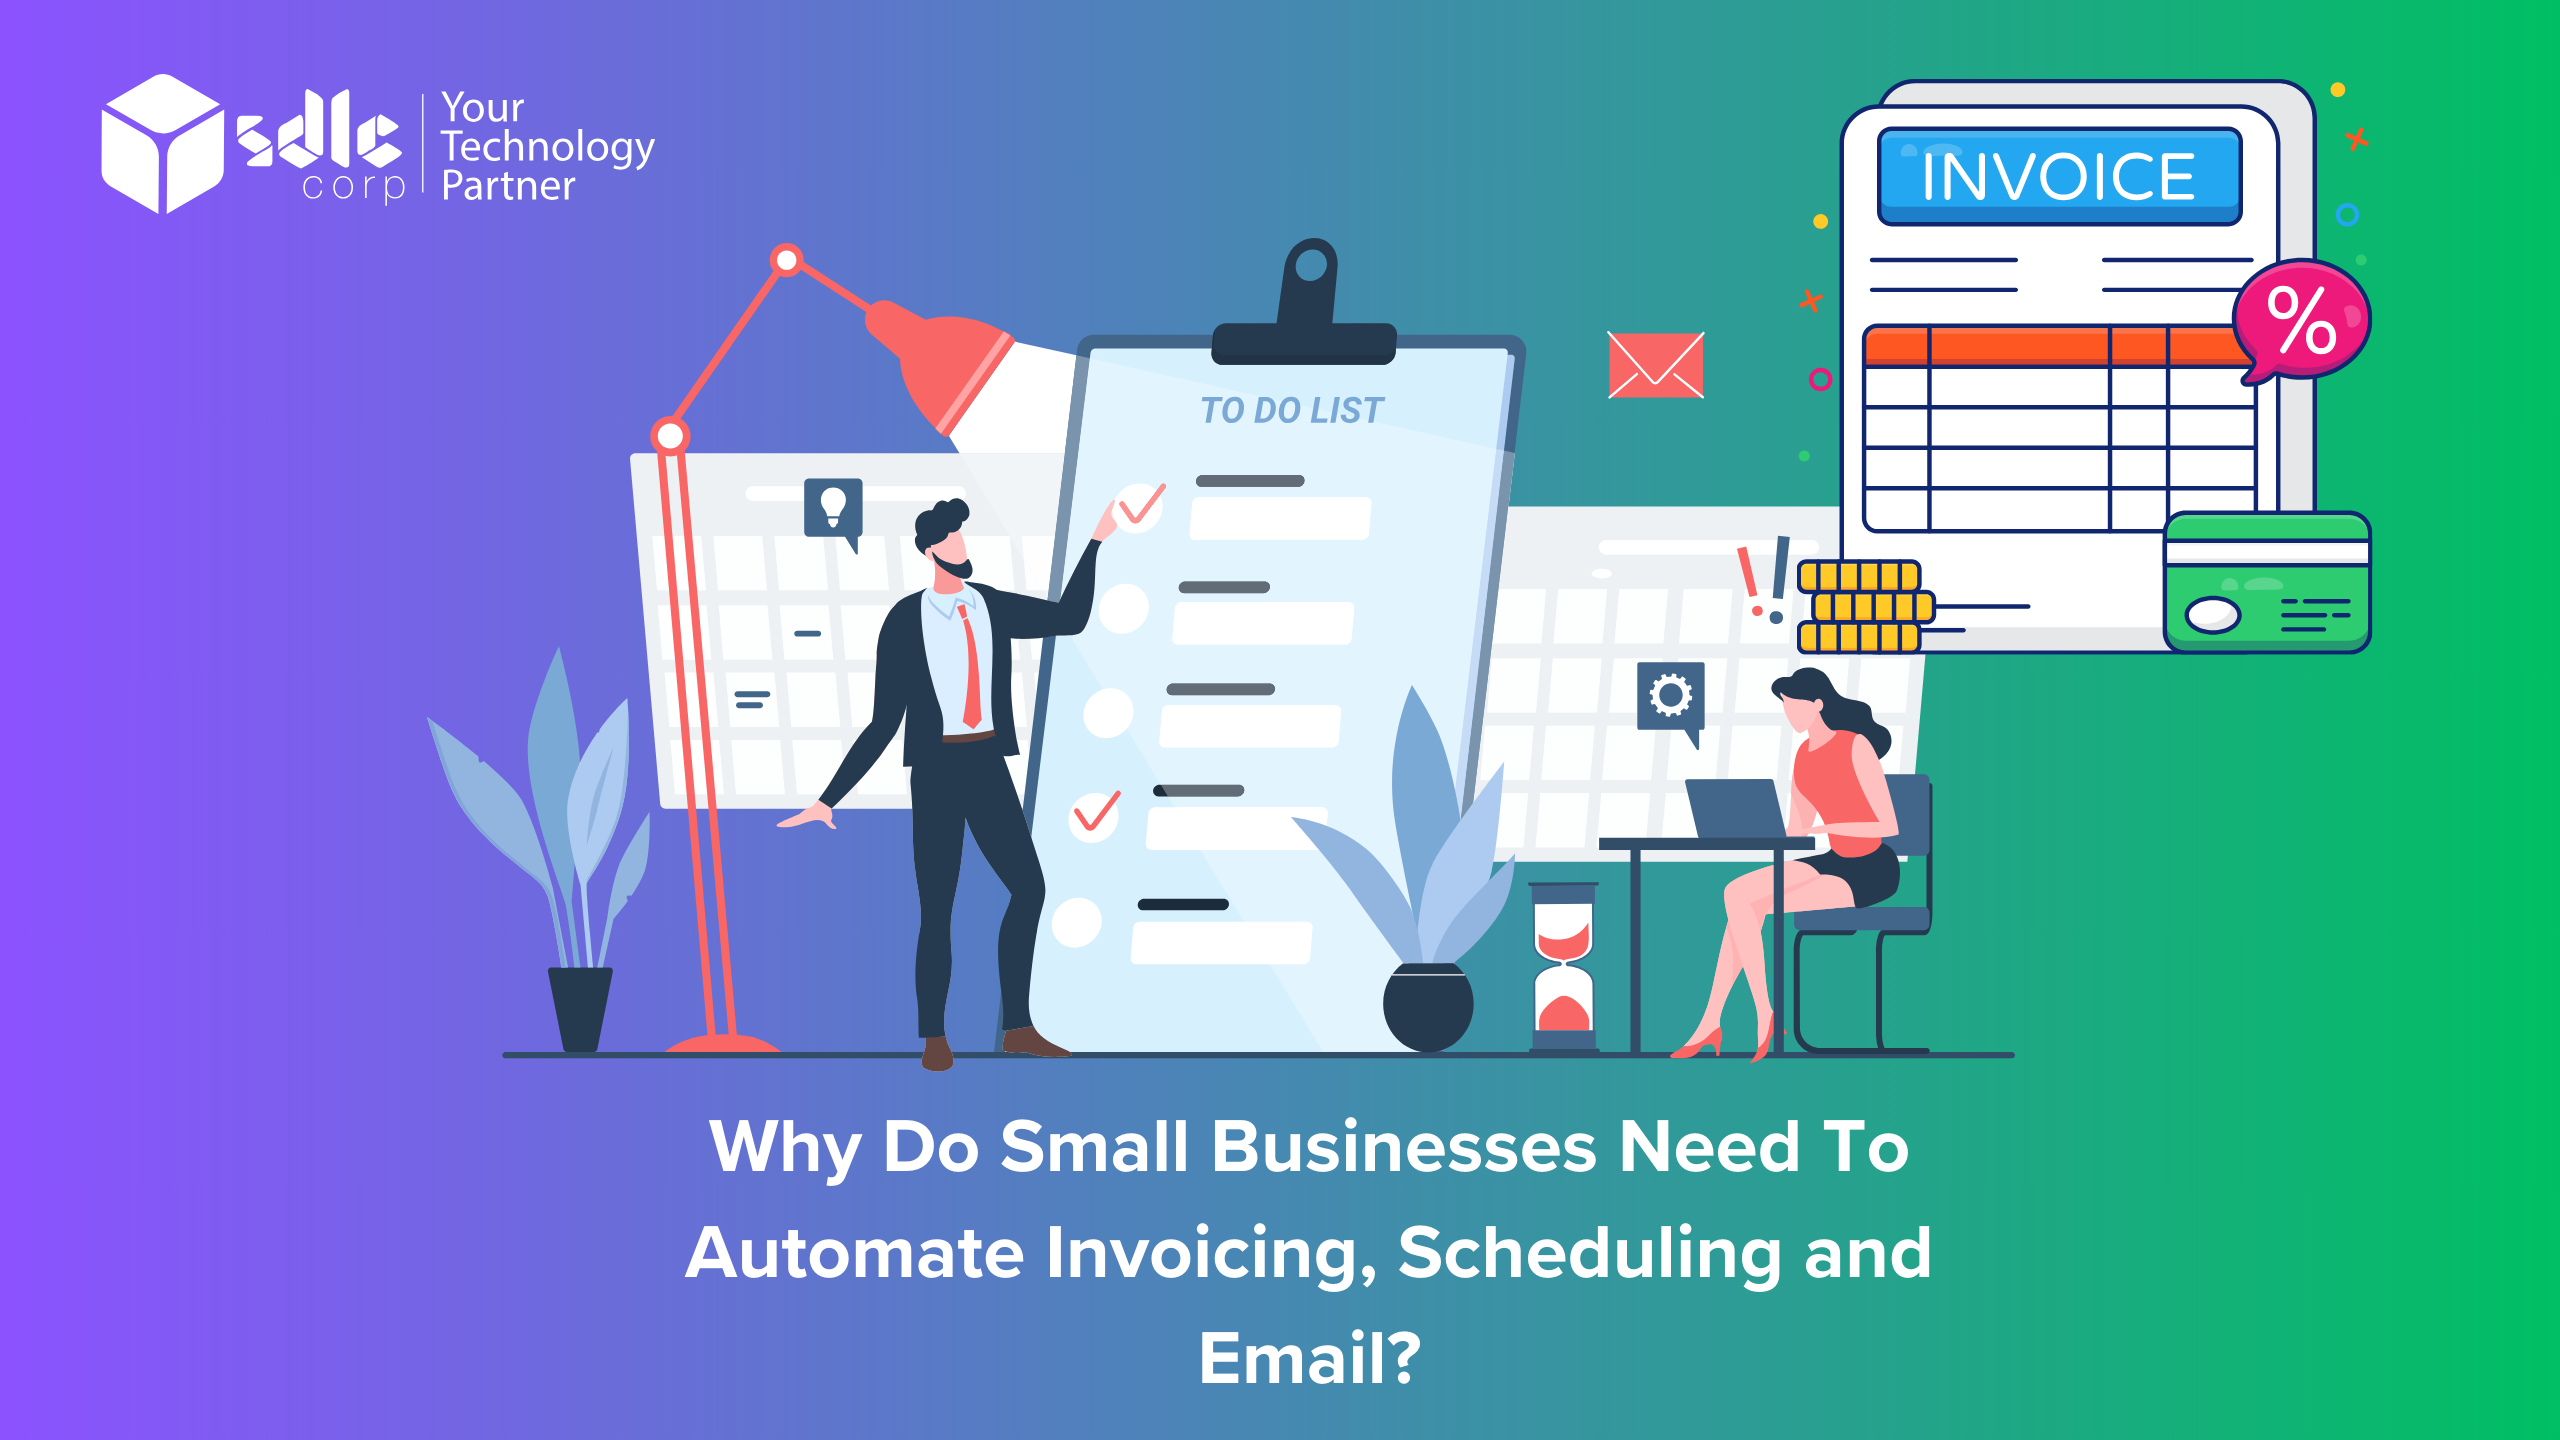 Why do small businesses need to automate invoicing, scheduling and email